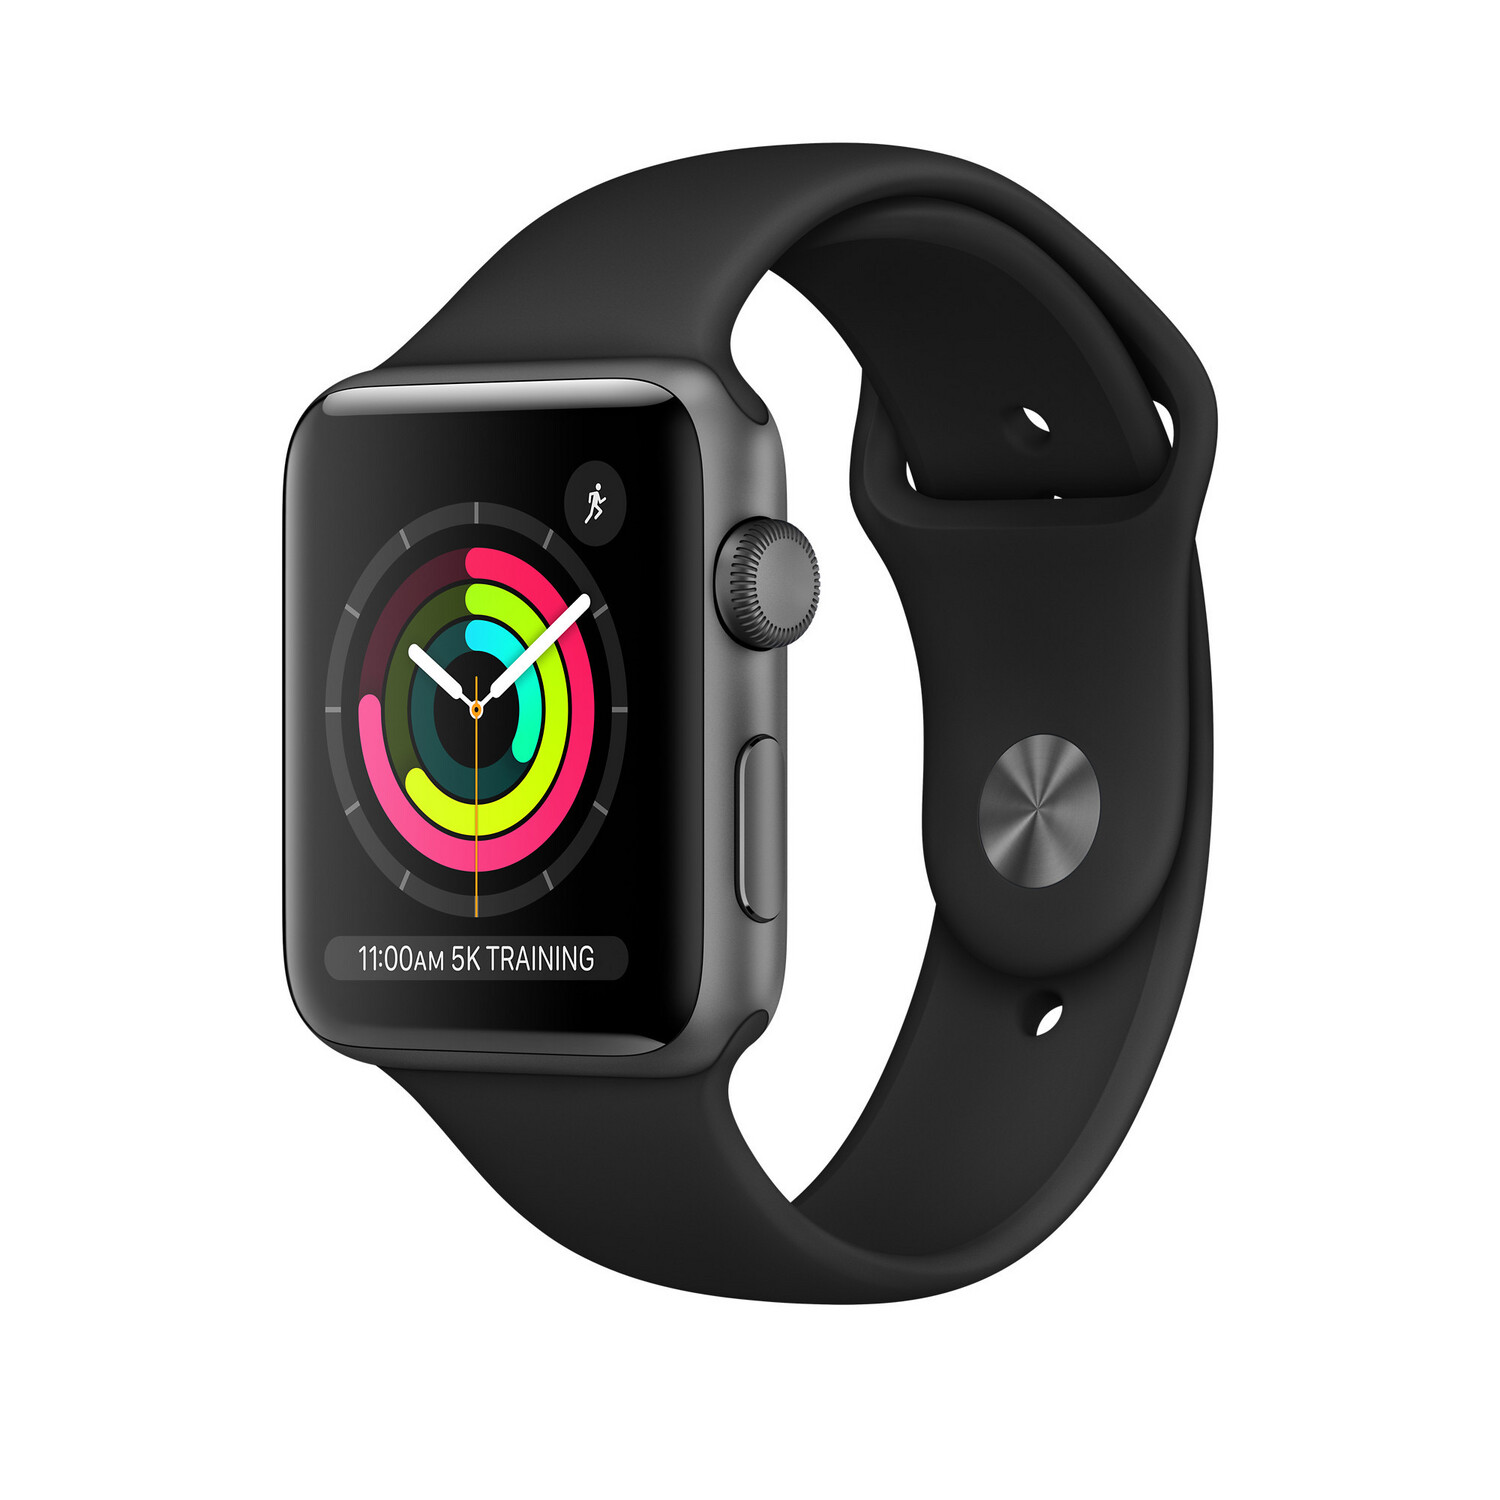 Apple Watch SERIES 3

Space Gray With Black Sport Band